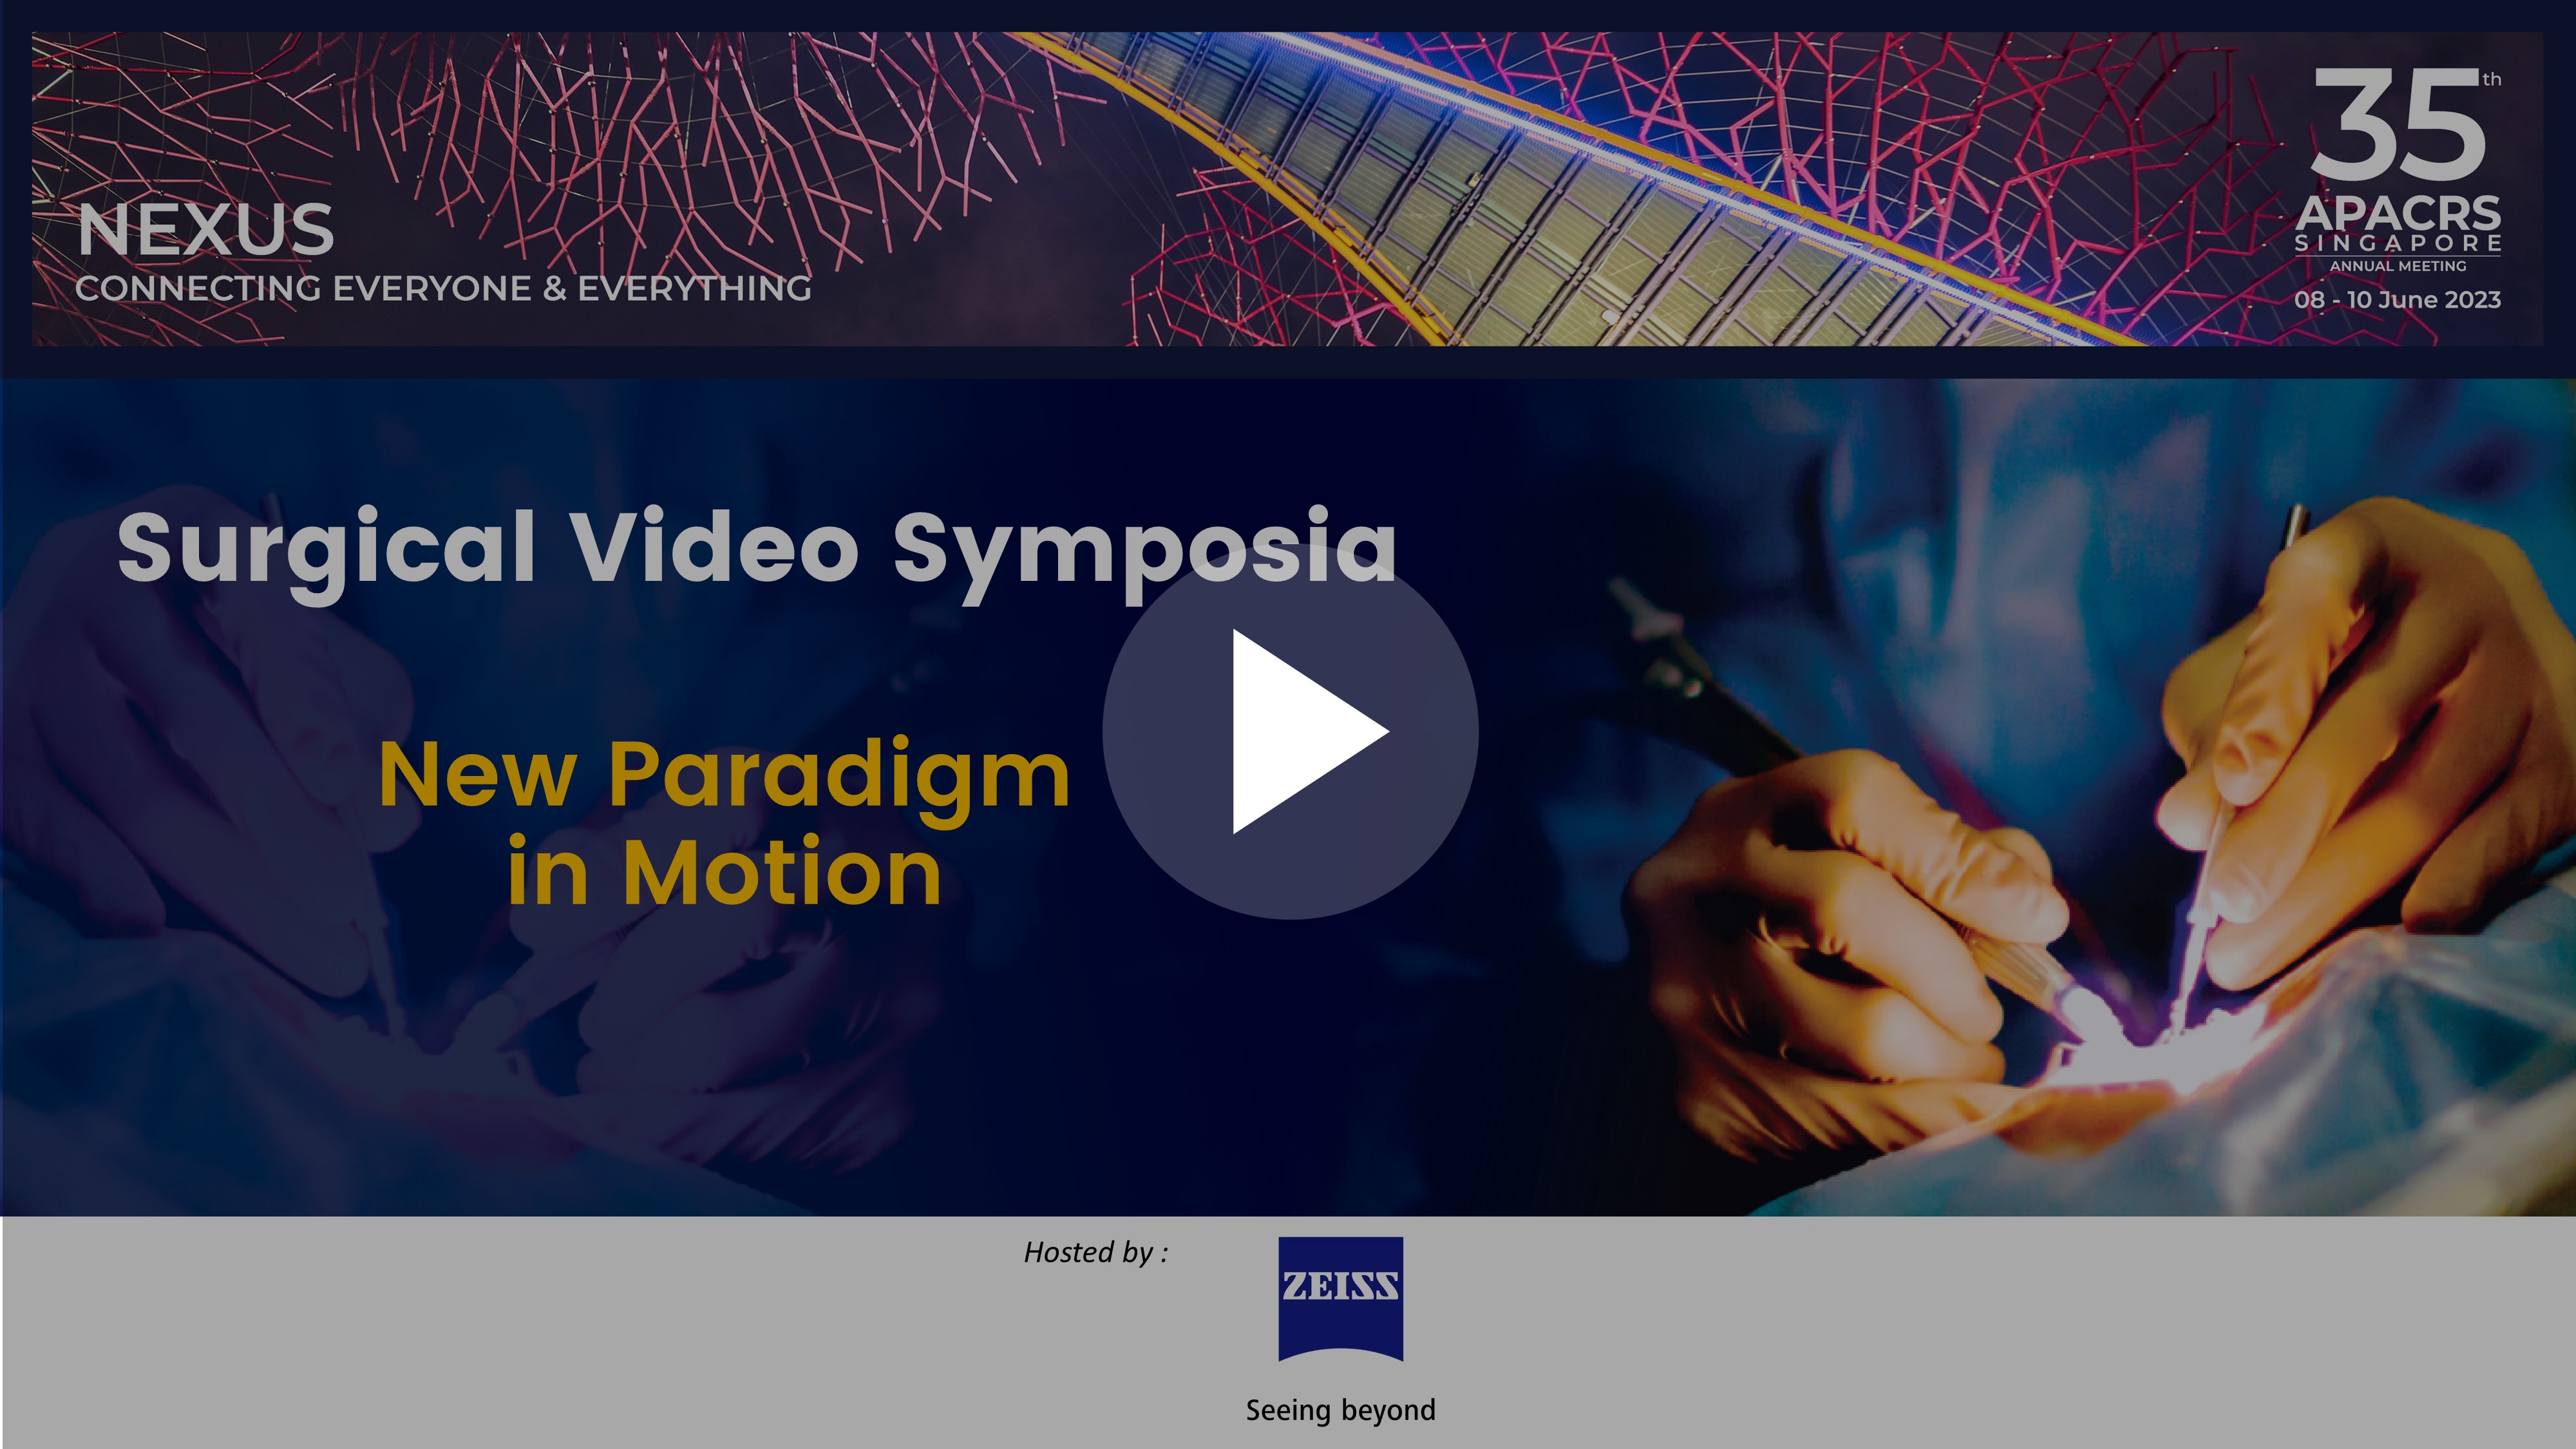 35th APACRS Annual Meeting Zeiss Surgical Video thumbnail